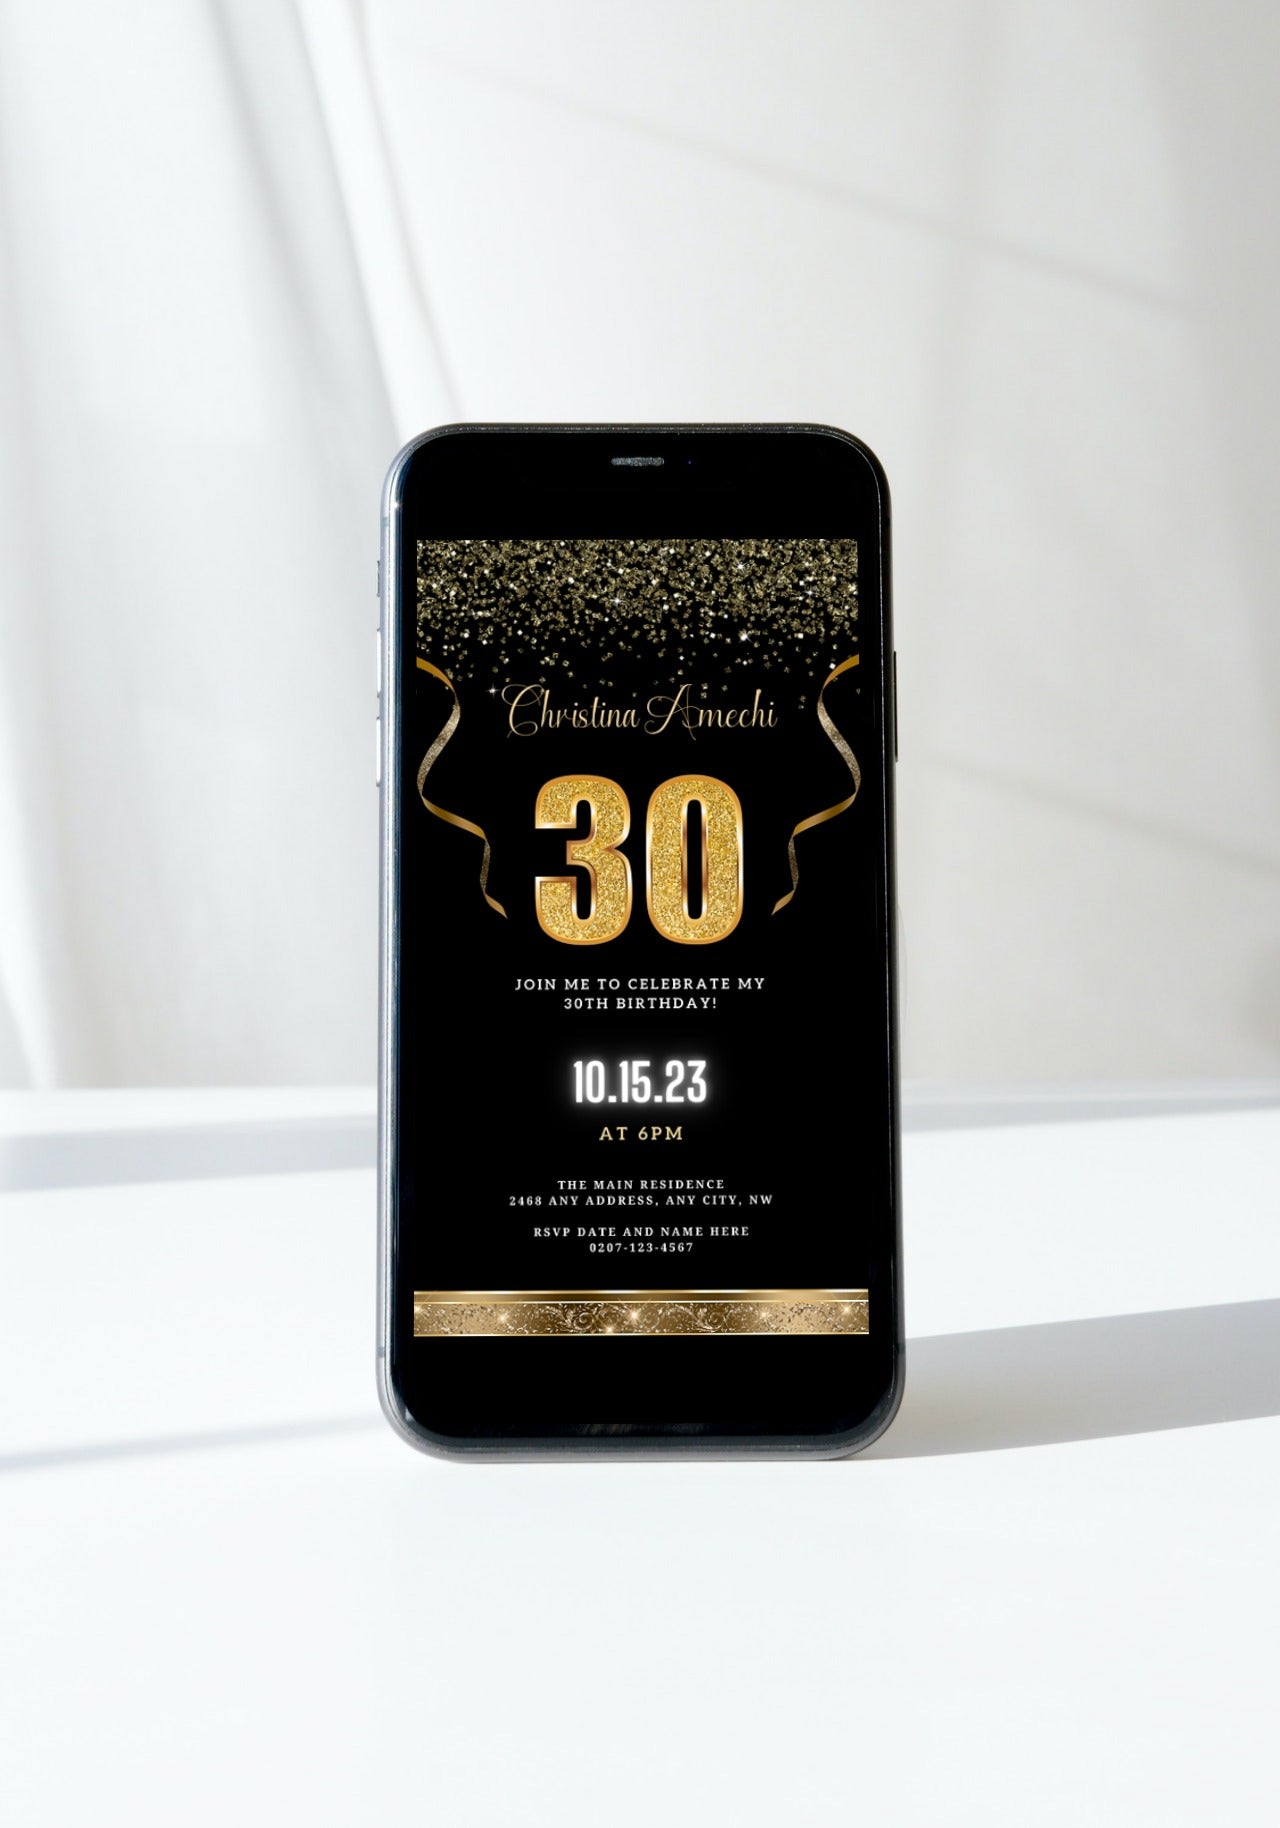 Customizable Digital Black Gold Confetti 30th Birthday Evite displayed on a smartphone screen with gold text and confetti.